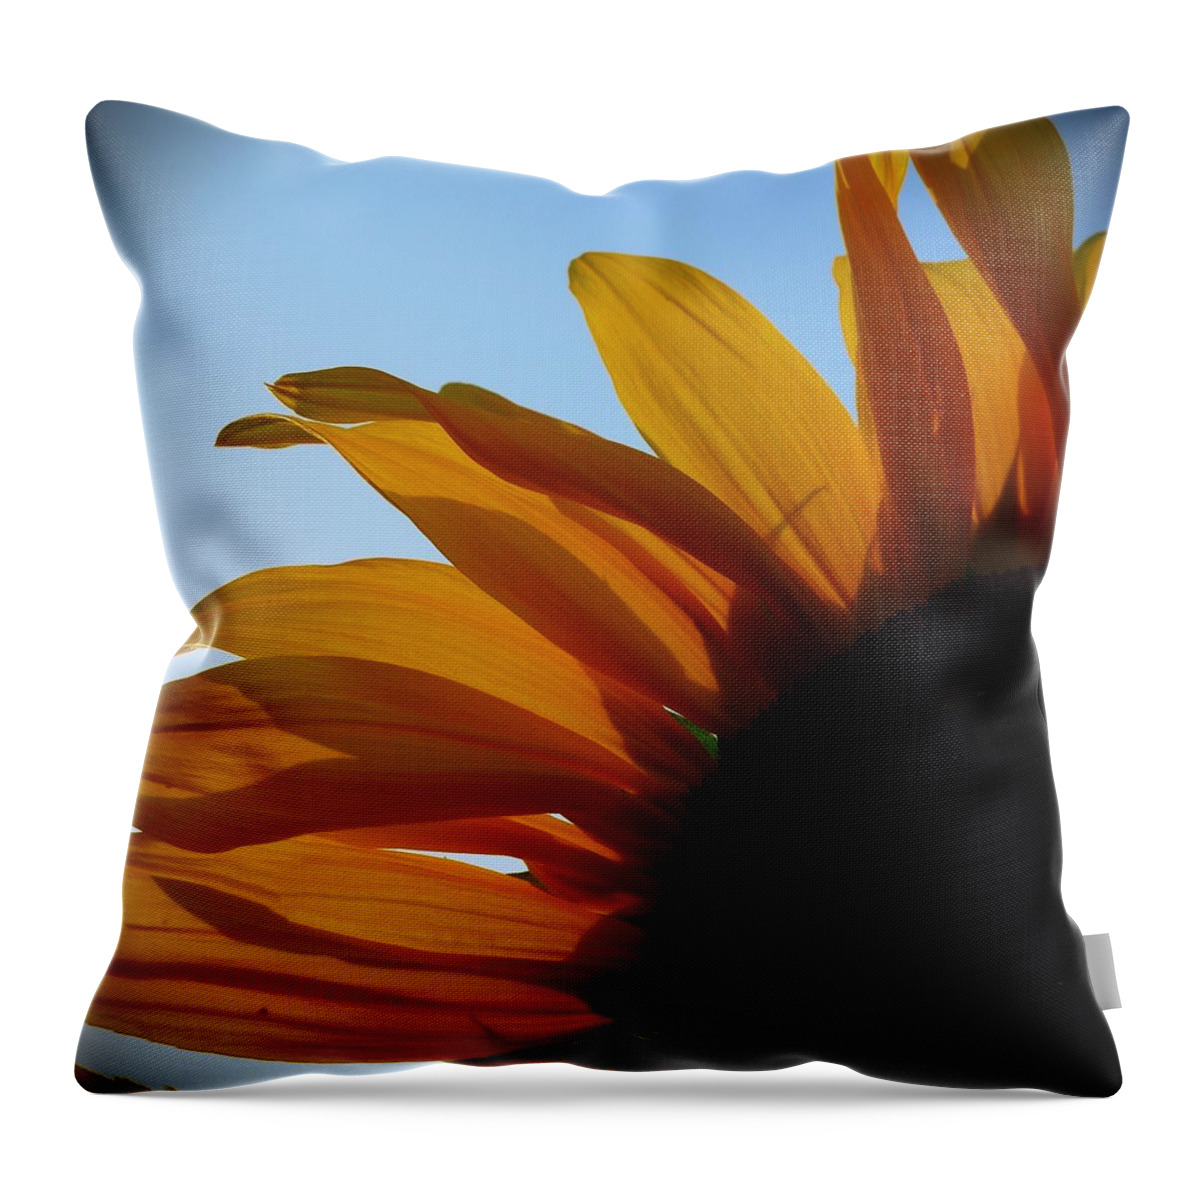 Sunflower Throw Pillow featuring the photograph Sunflower 2 by Anne Thurston